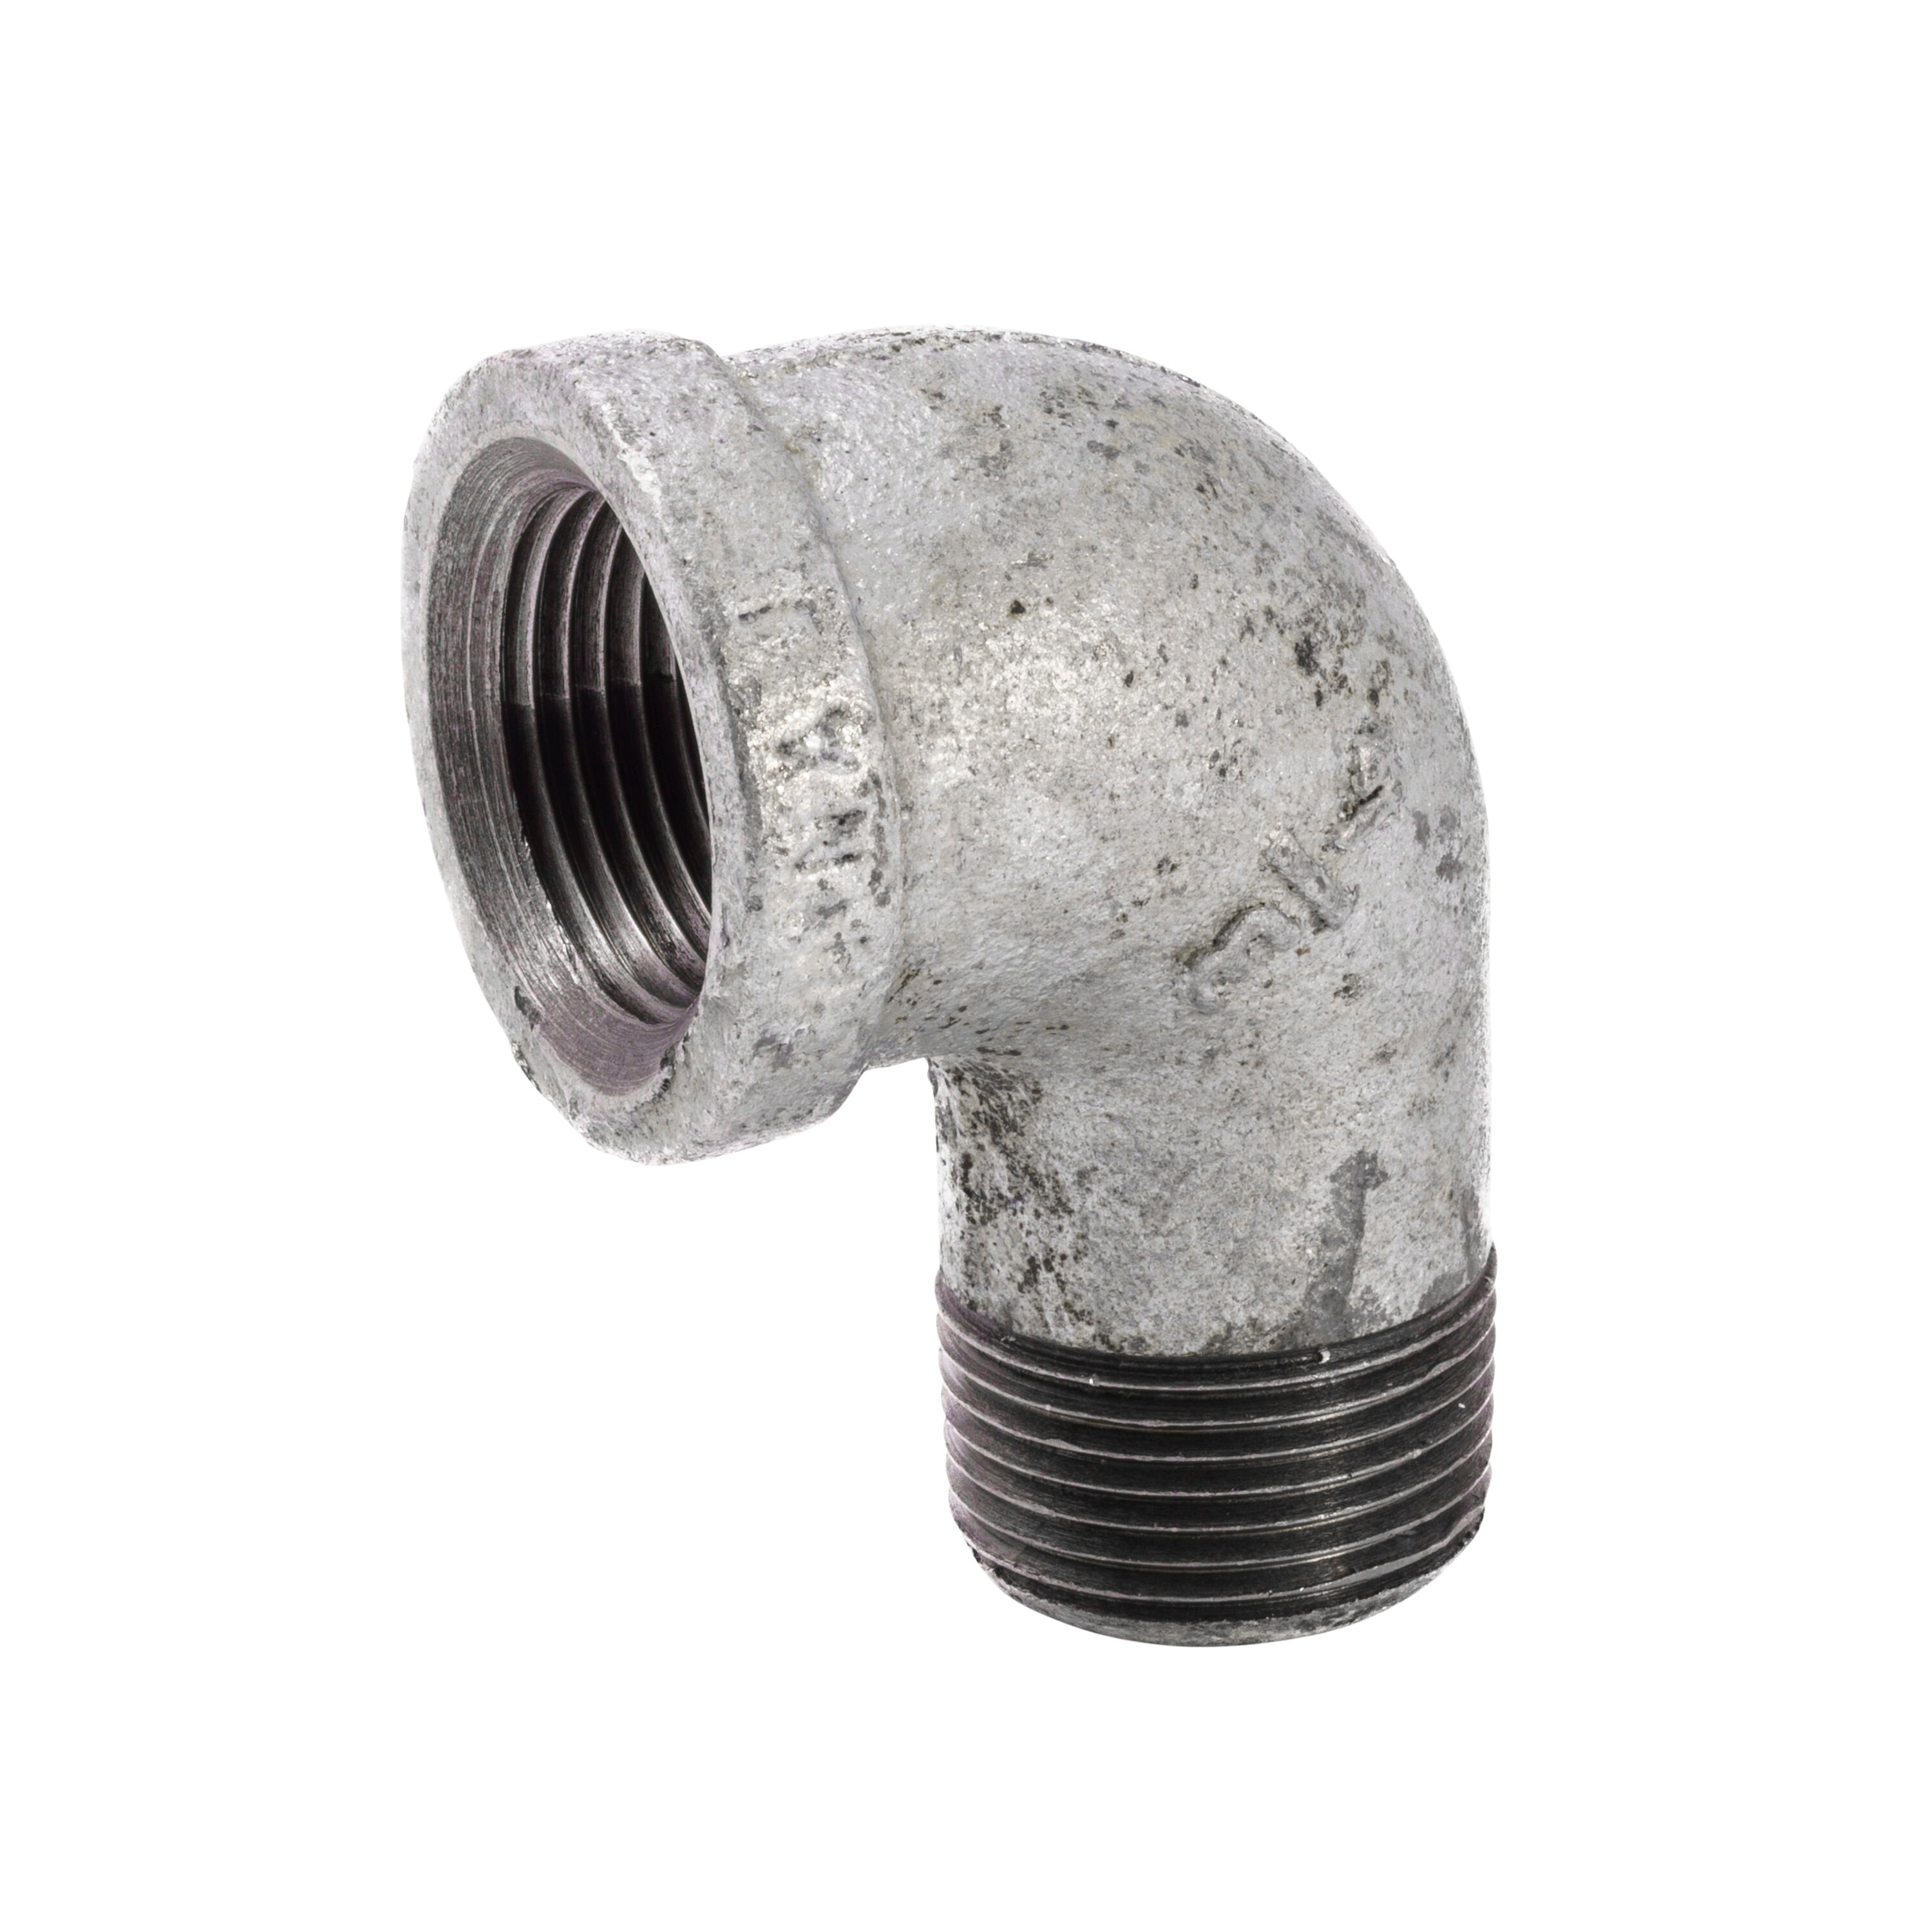 Pipe Fitting Insert Reducing Elbow, Female, Poly, 1 x 3/4-In